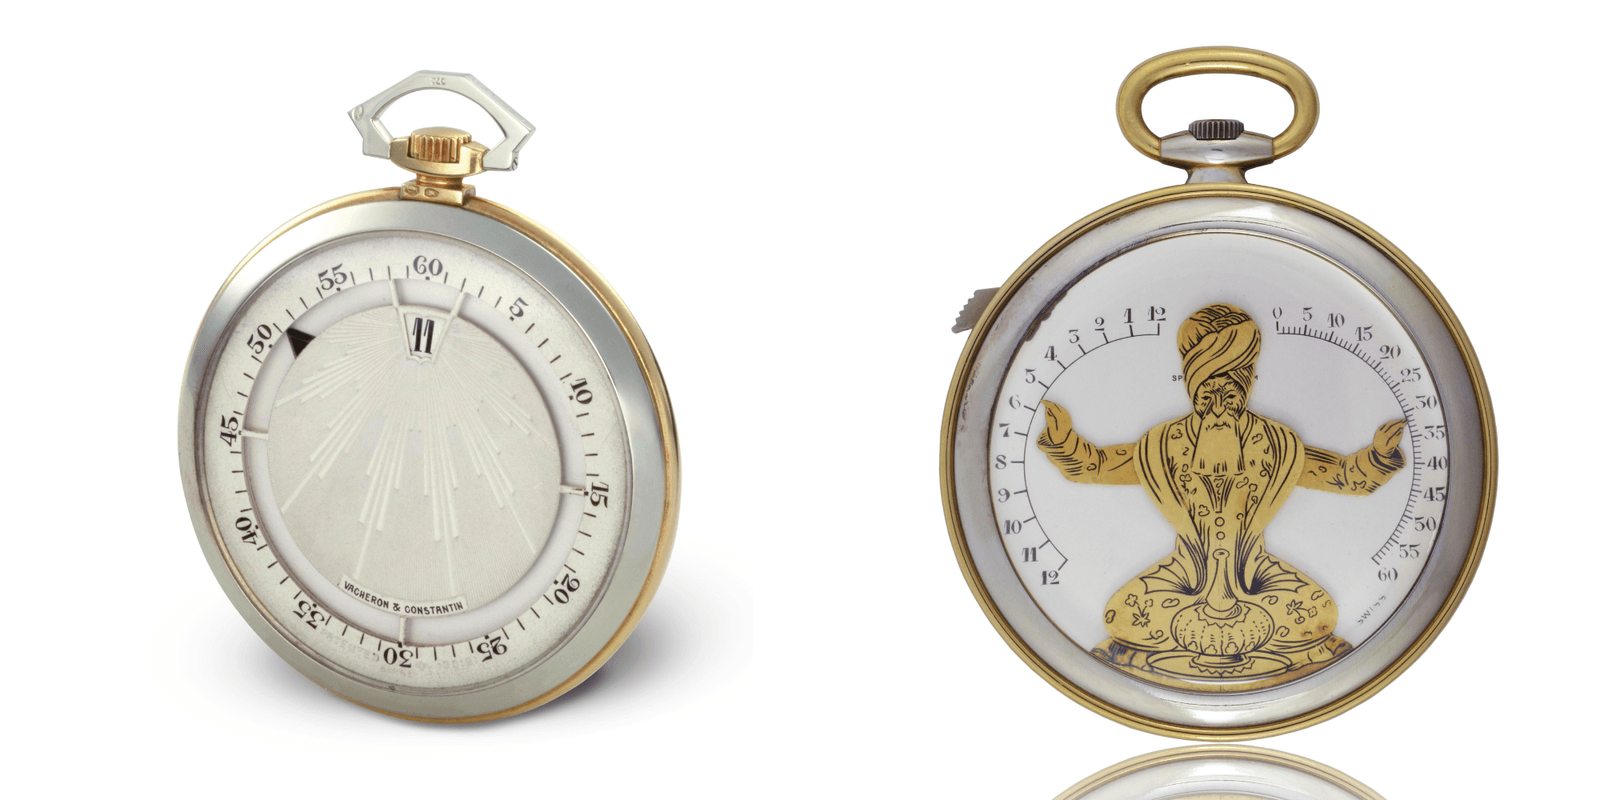 L- Pocket watch with jumping hour and minutes displayed beneath the dial by a hand (Ref. Inv. 10152) - 1929 and R- “Arms in the air” two-tone yellow and white gold pocket watch, bi-retrograde display (Ref. Inv. 11060) -1930